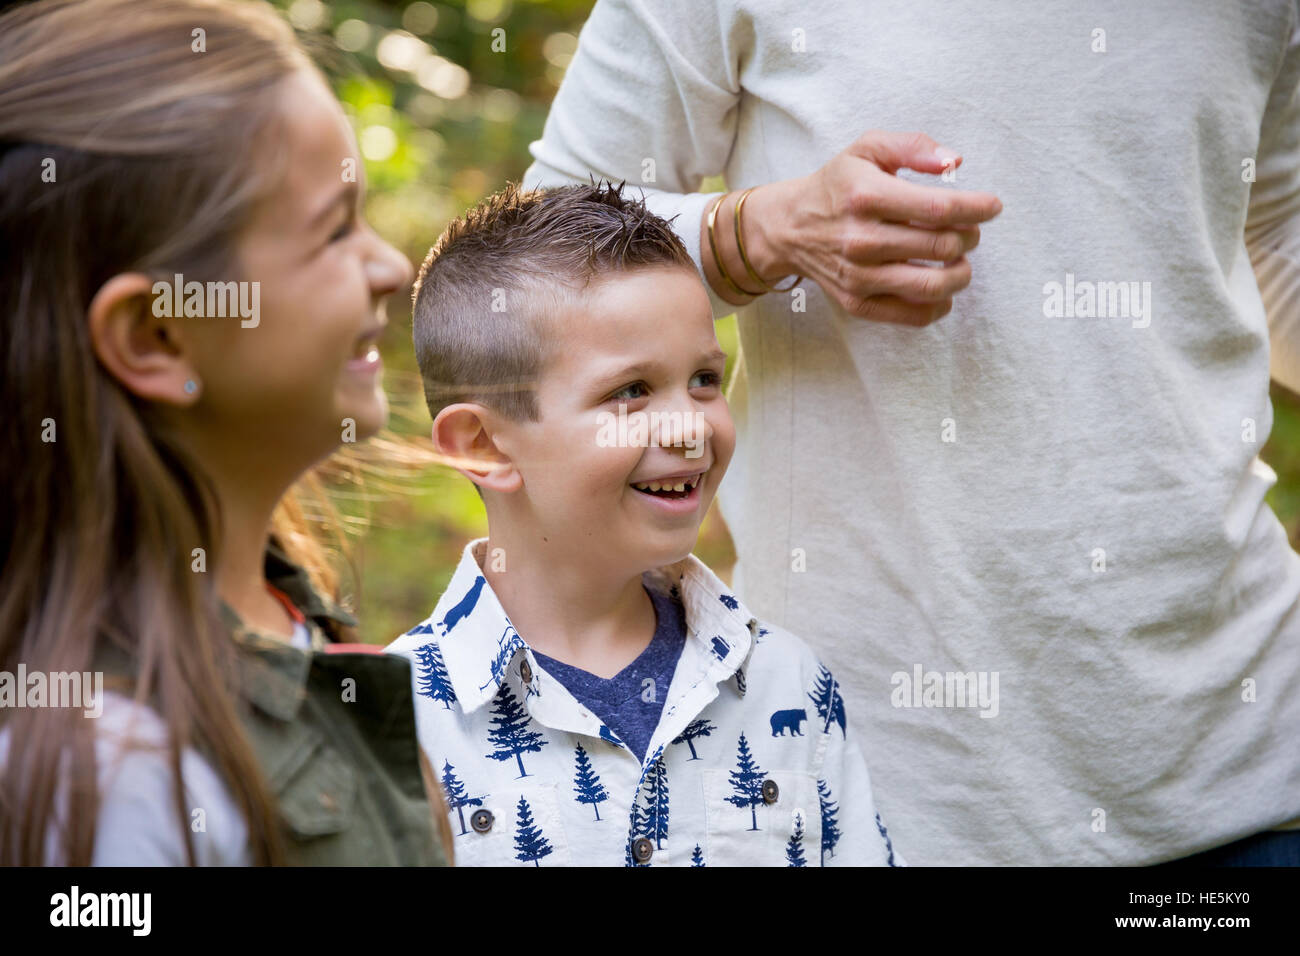 Candid lifestyle portrait of a young boy and his sister laughing and smiling at a nature park. Stock Photo